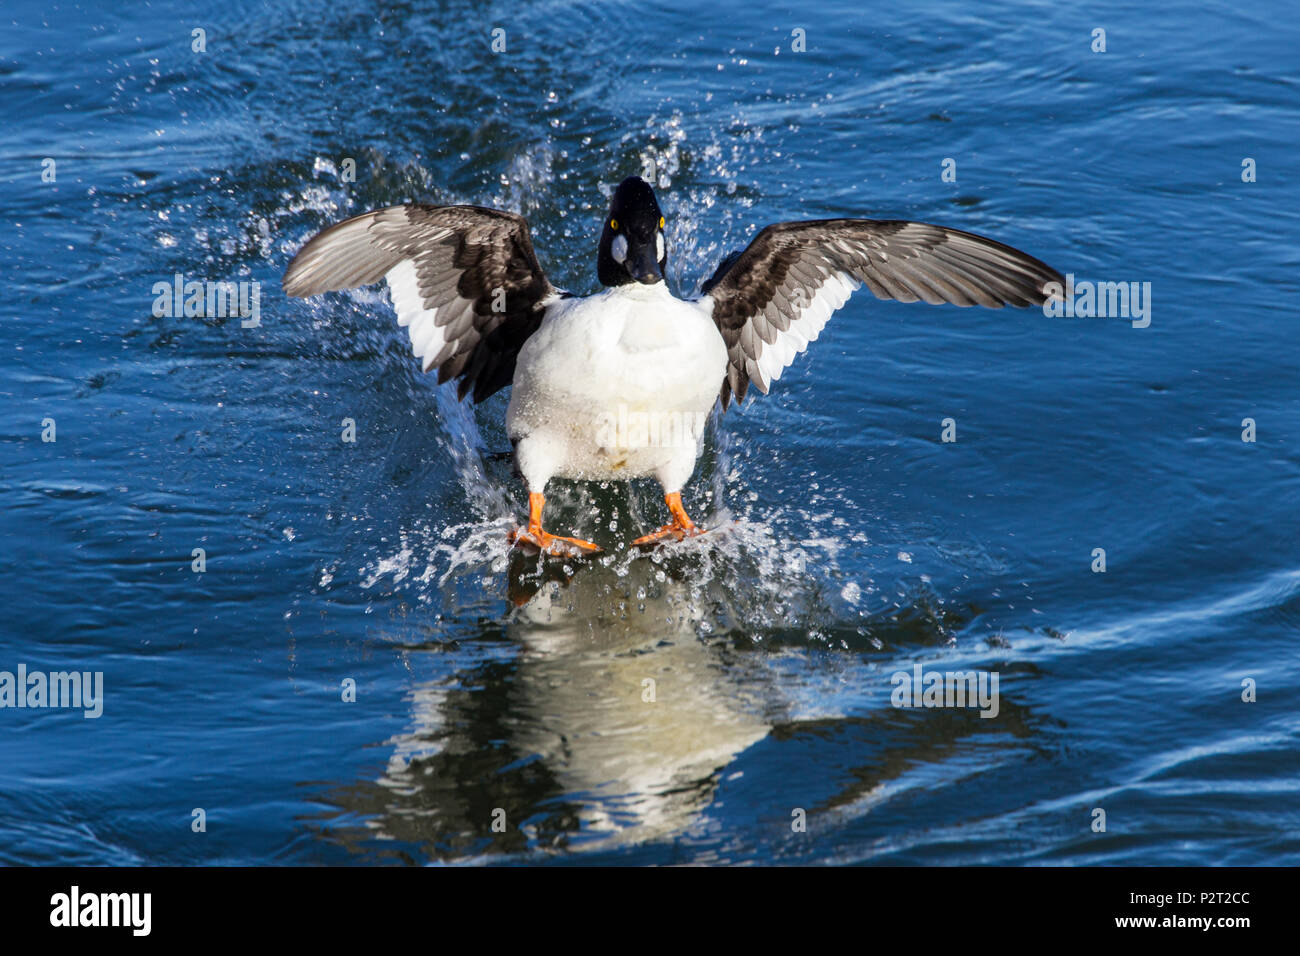 Splash down! Diving ducks, like this common goldeneye (Bucephala clangula) skidding to a stop, need space for both taking off and landing. Stock Photo